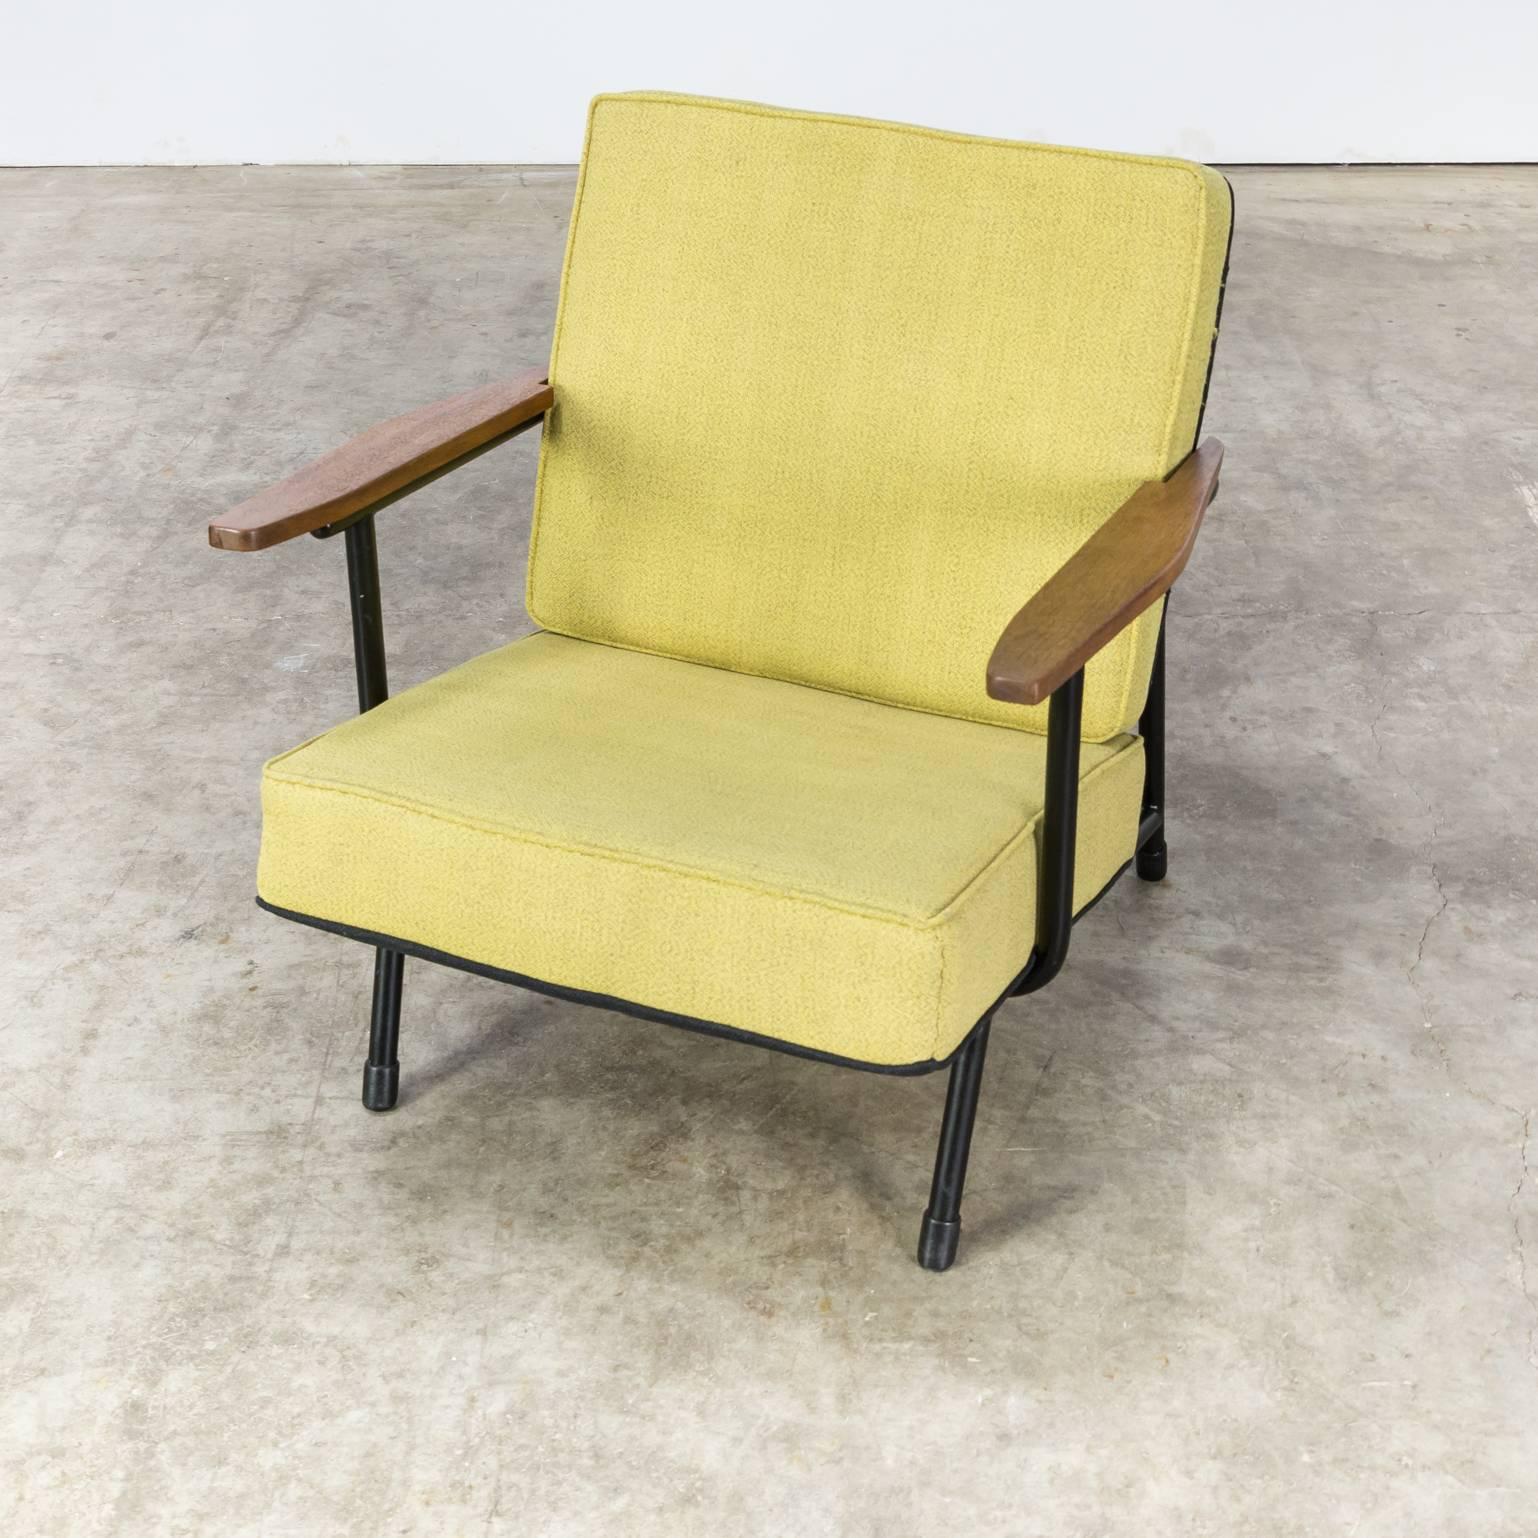 1950s Alf Svensson ‘013’ Low Back Chairs for DUX, Set of Two For Sale 2